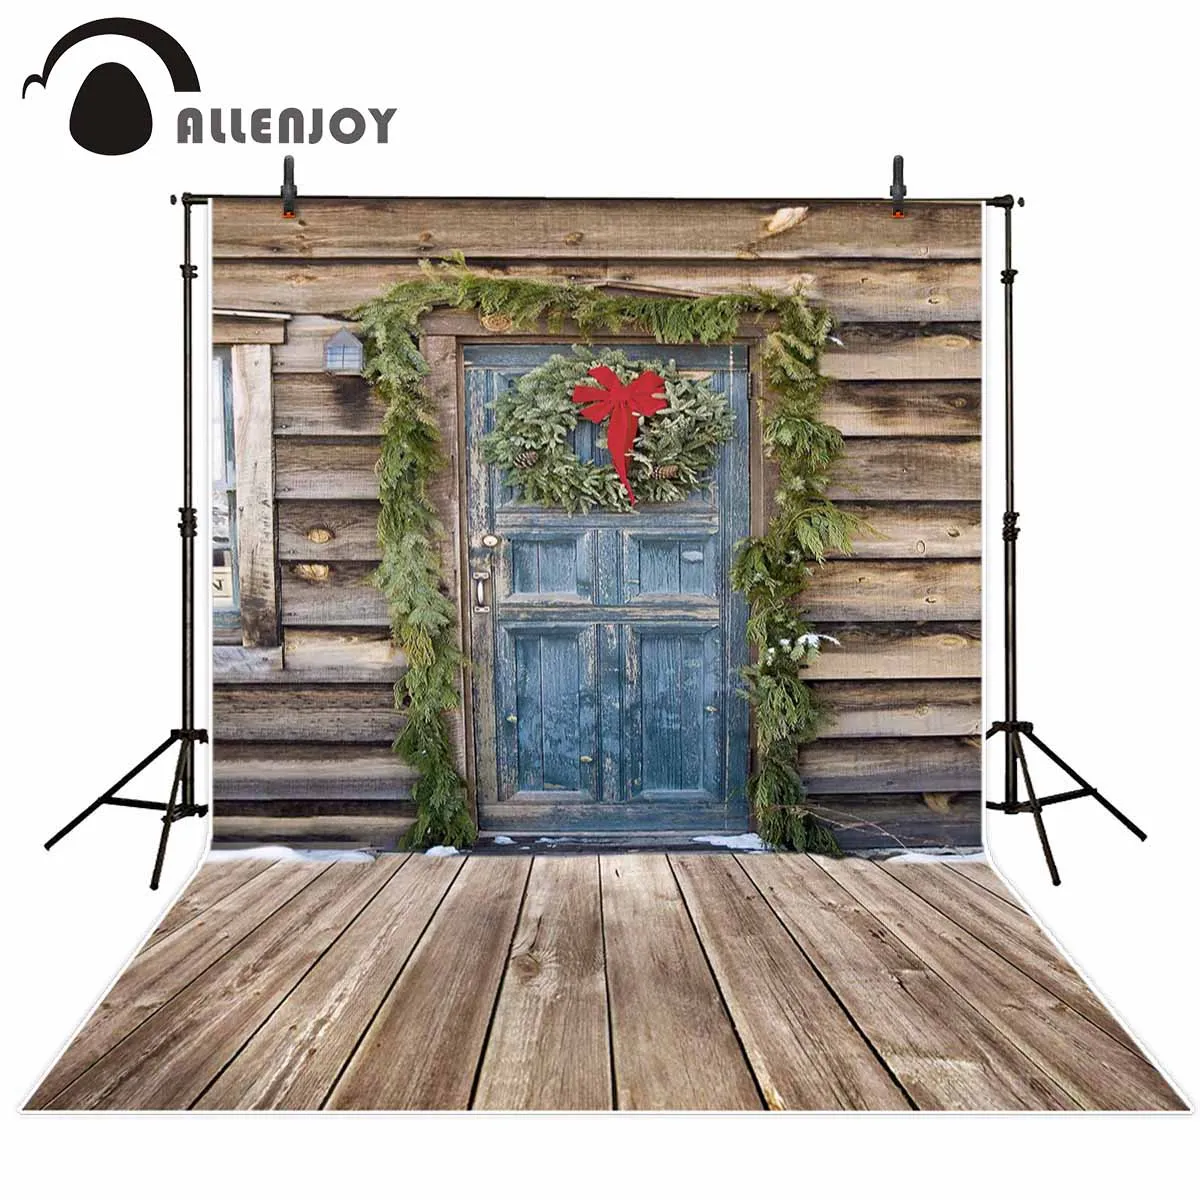 

Allenjoy Christmas backdrop photography wreath door cabin winter countryside rural decoration for home photo studio background